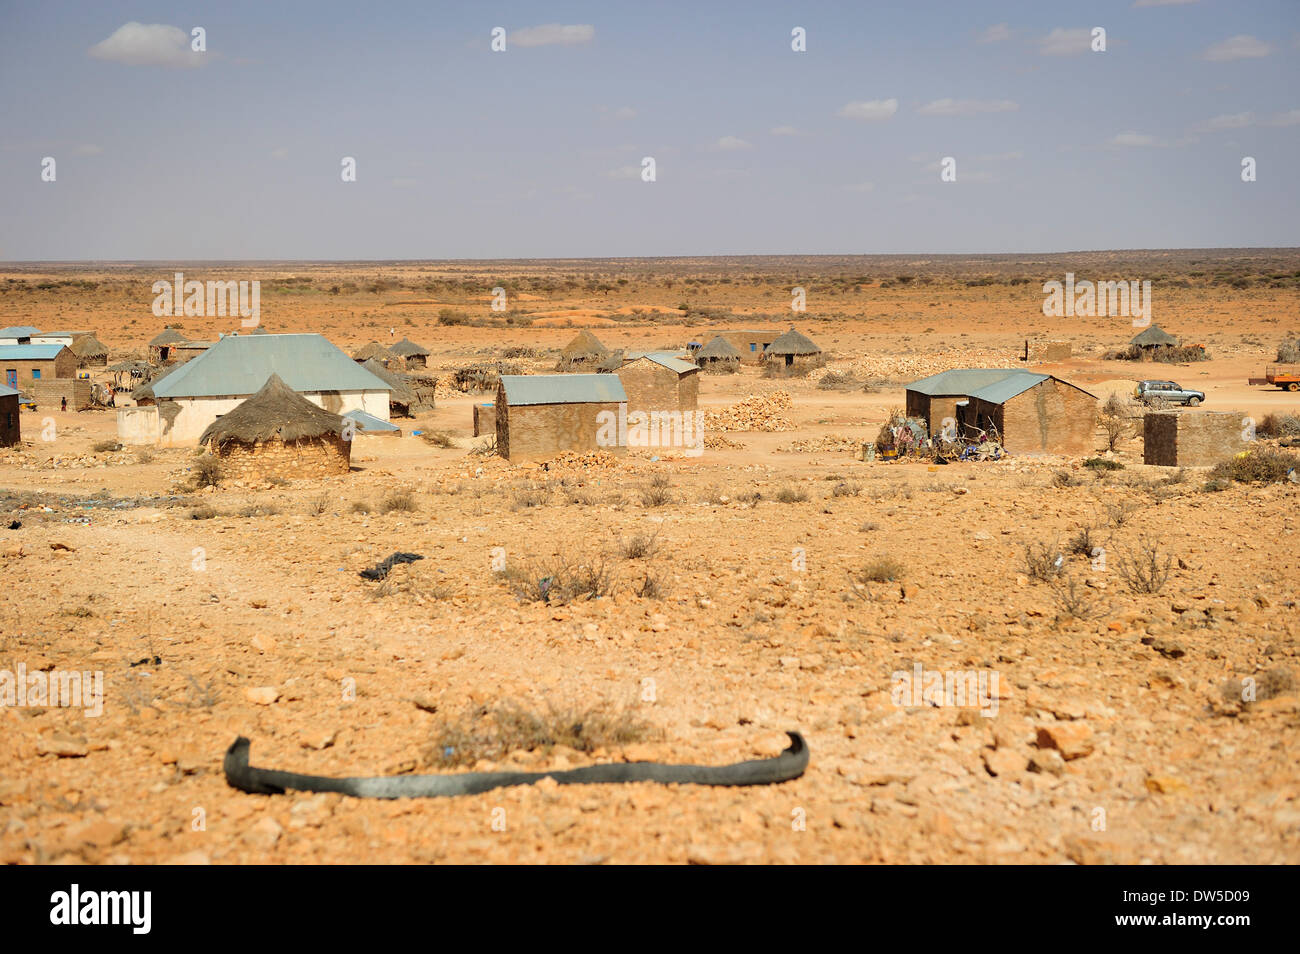 Puntland has a semi-arid climate. Rainfall is sparse and variable, with no single area receiving more than 400 mm (15.7 in) of rain annually. Even the coastal region is desertlike. Stock Photo